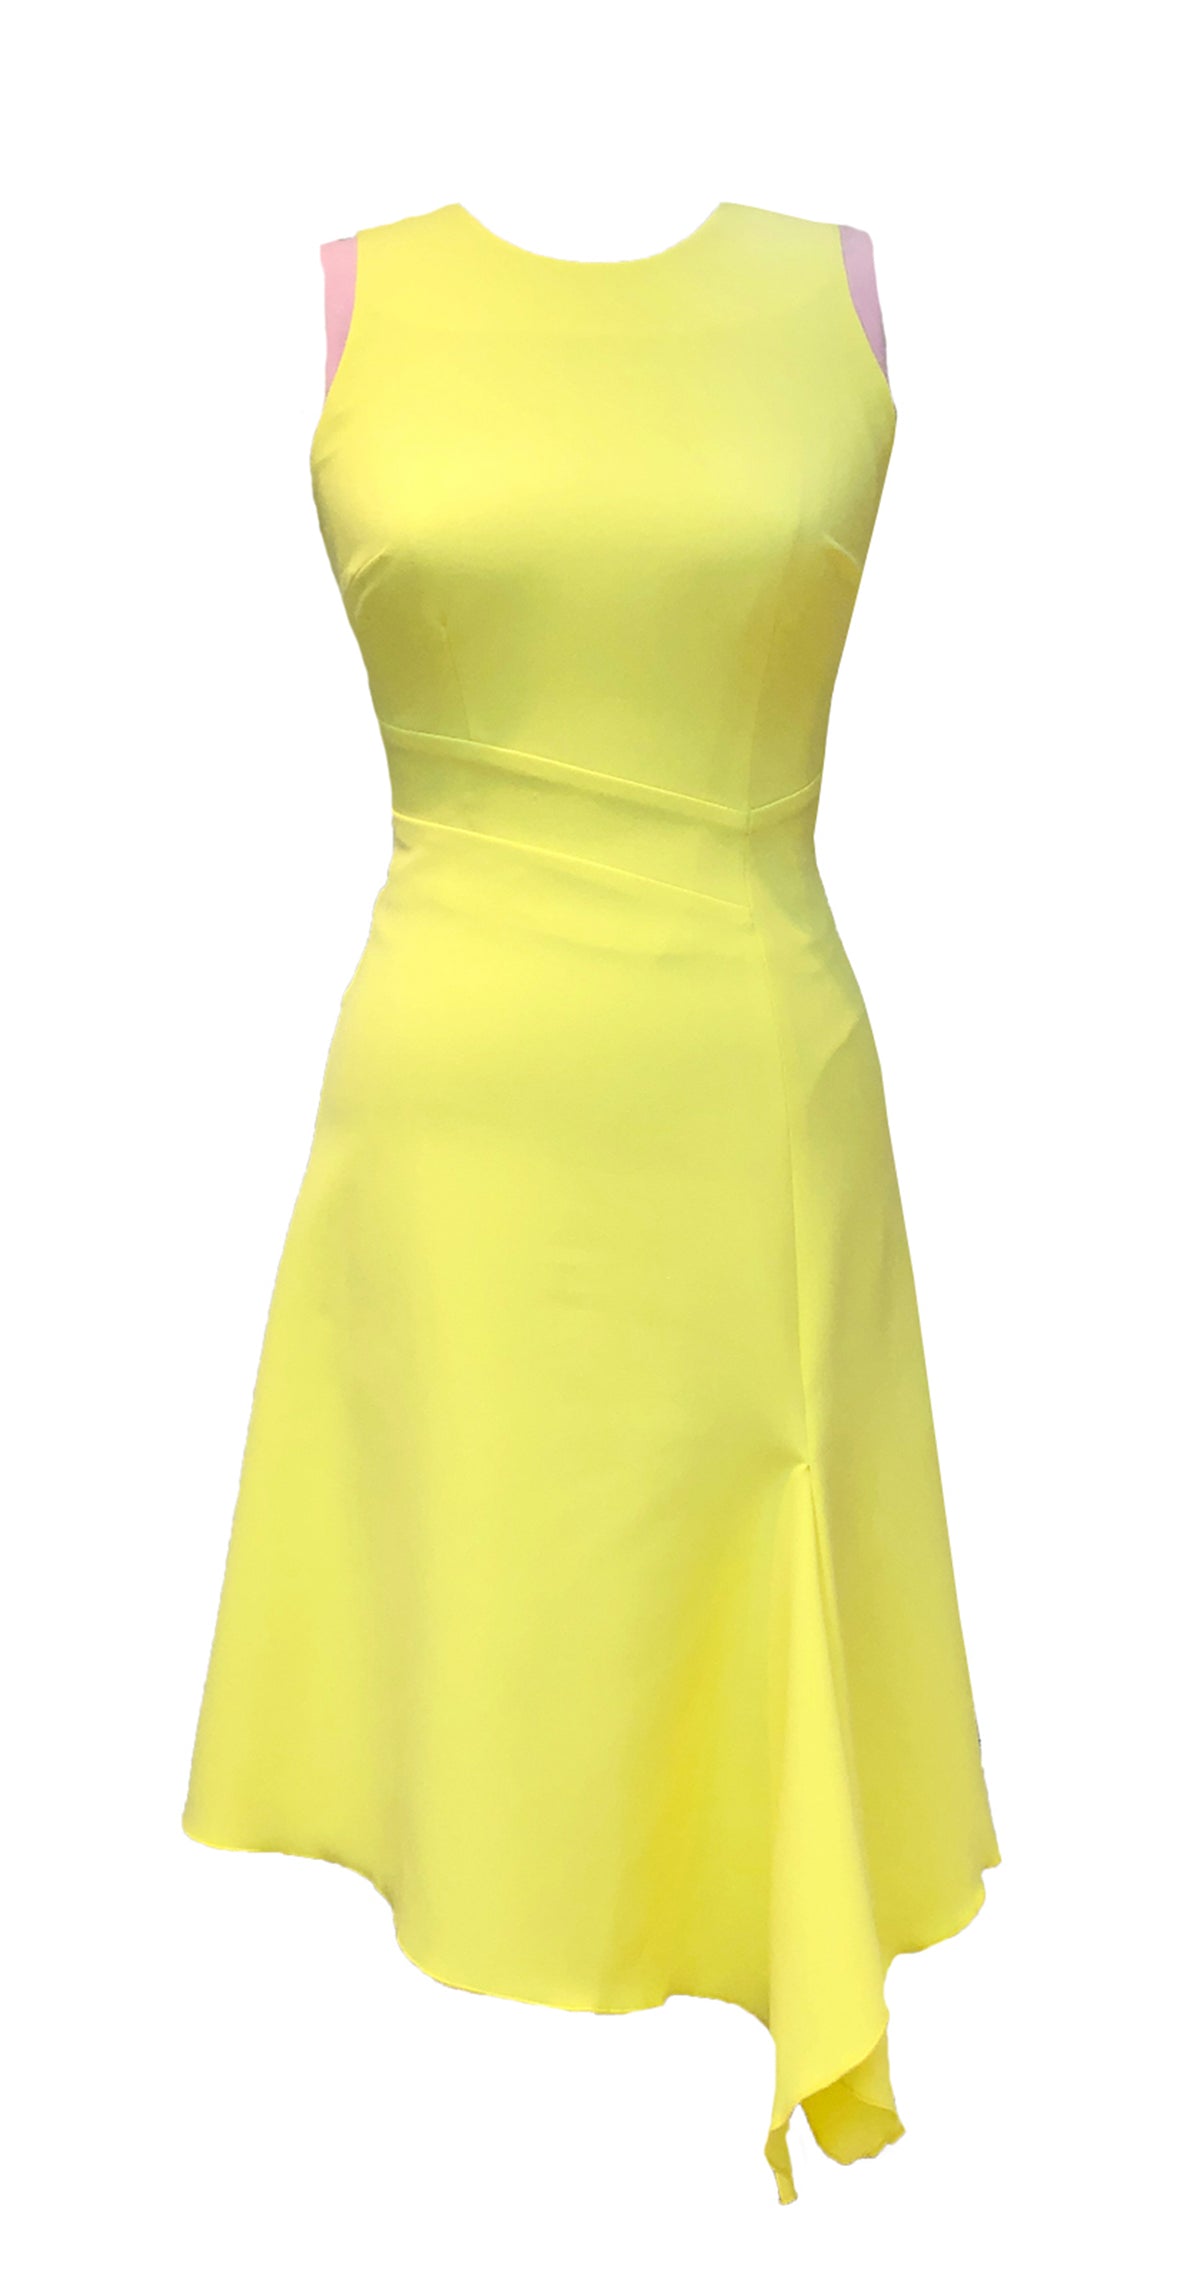 Adelle Dress DRC236 Yellow crepe with pink contrast